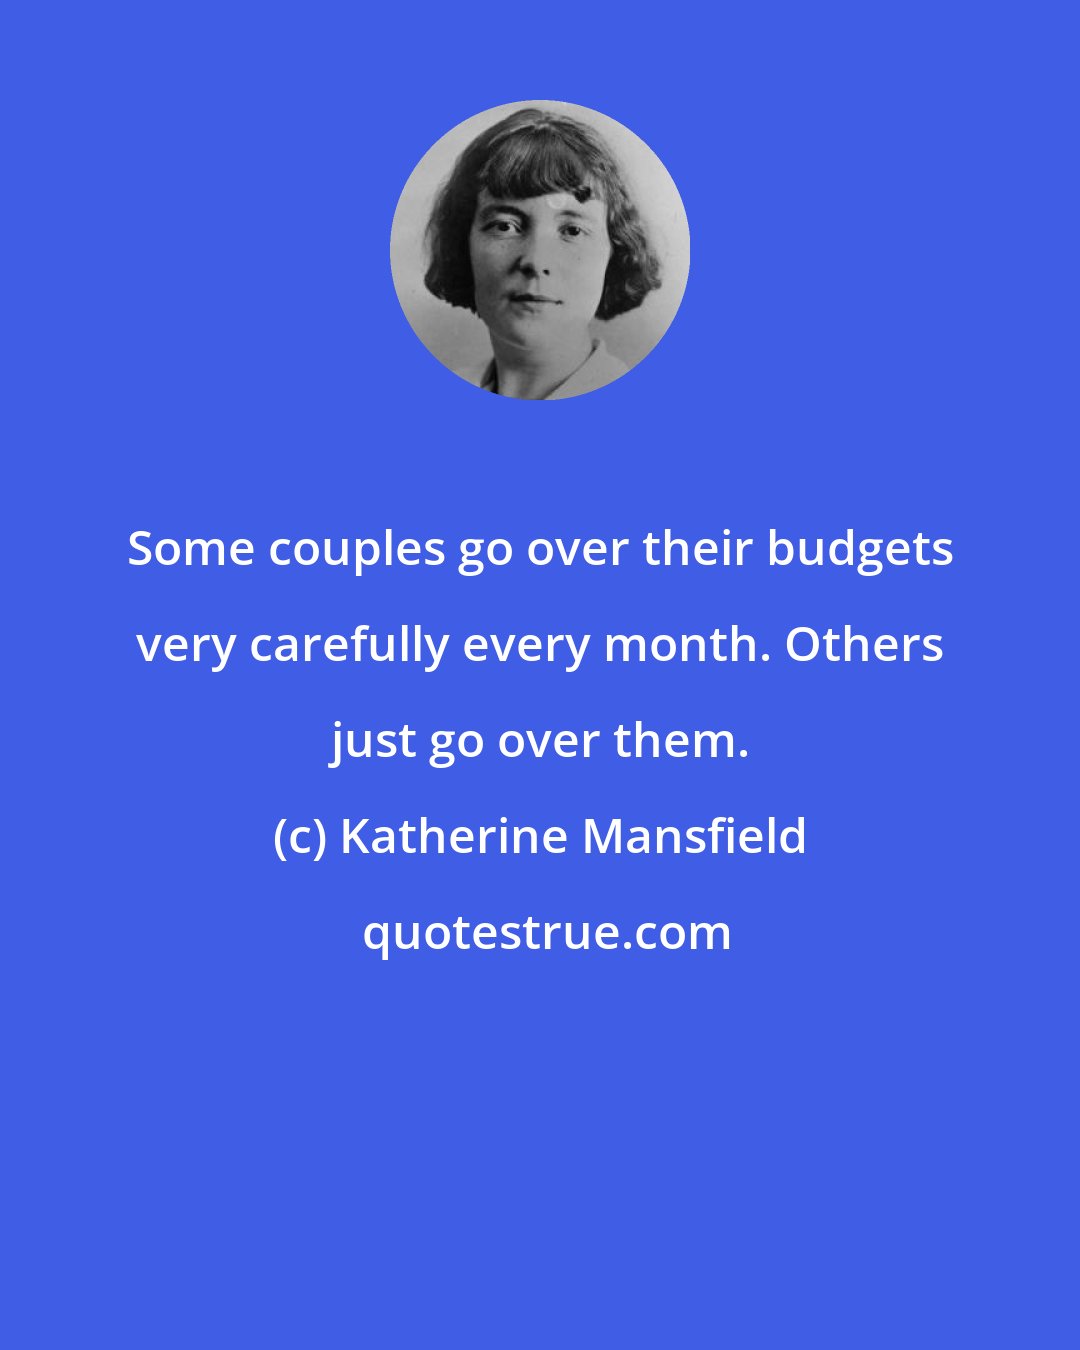 Katherine Mansfield: Some couples go over their budgets very carefully every month. Others just go over them.